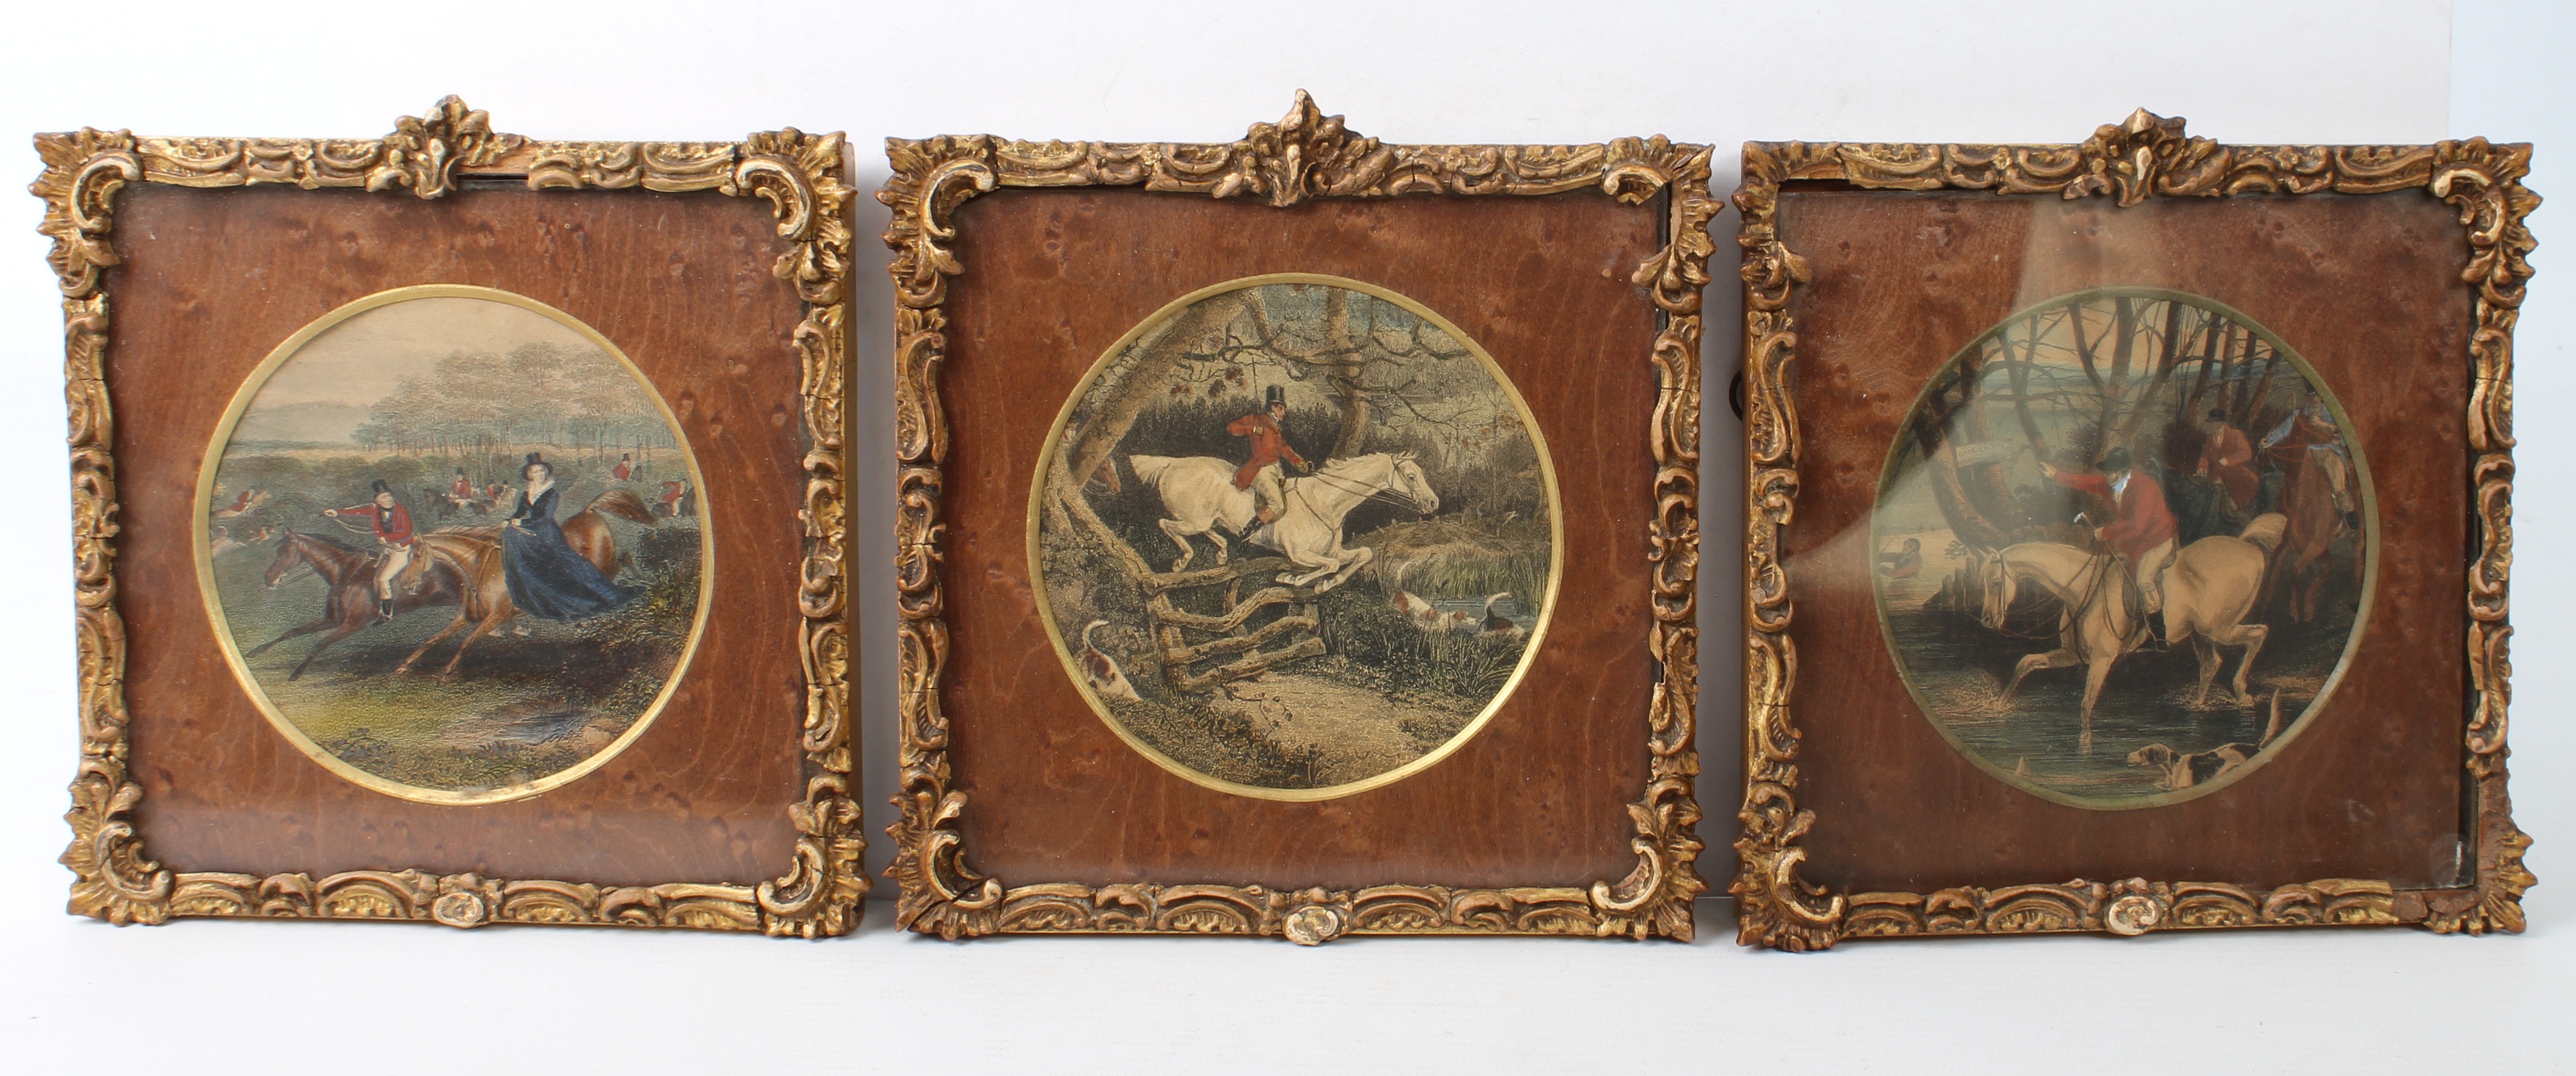 A set of three 19th century hand-coloured miniature engravings - hunting subjects, circular, eng. by